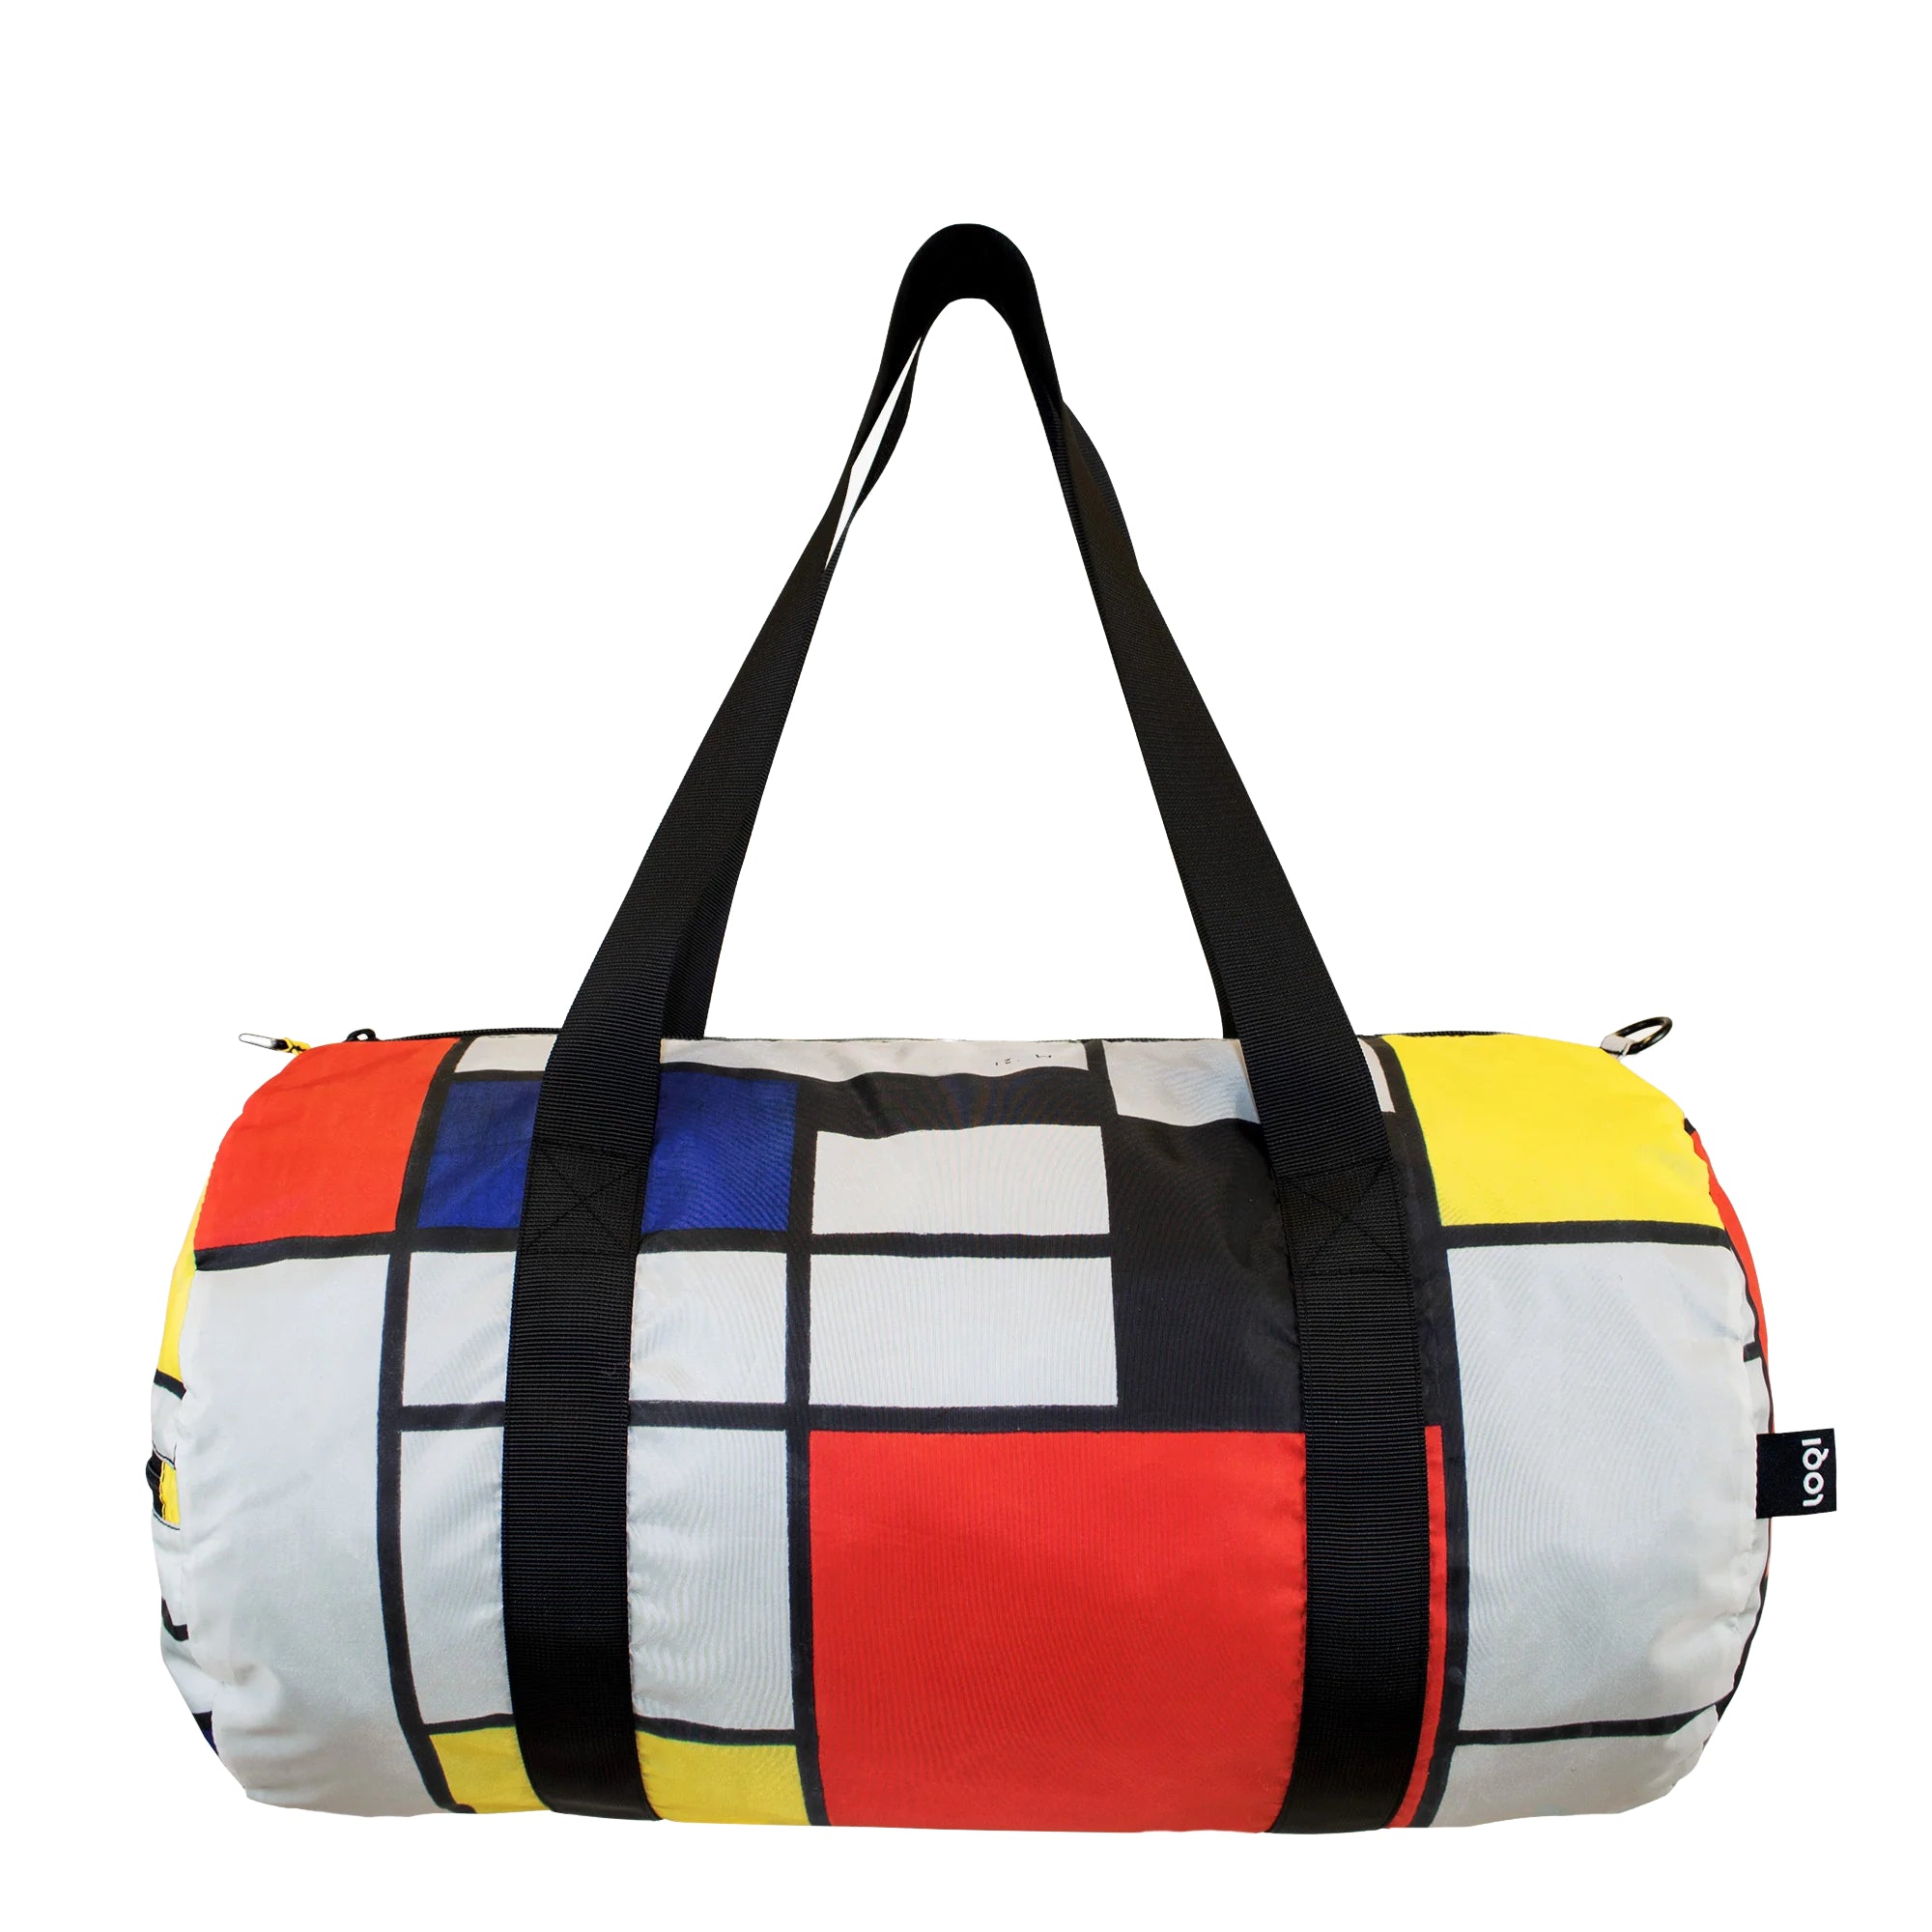 LOQI Recycled Weekender Tote Bag – Piet Mondrian Composition with Red, Yellow, Blue and Black